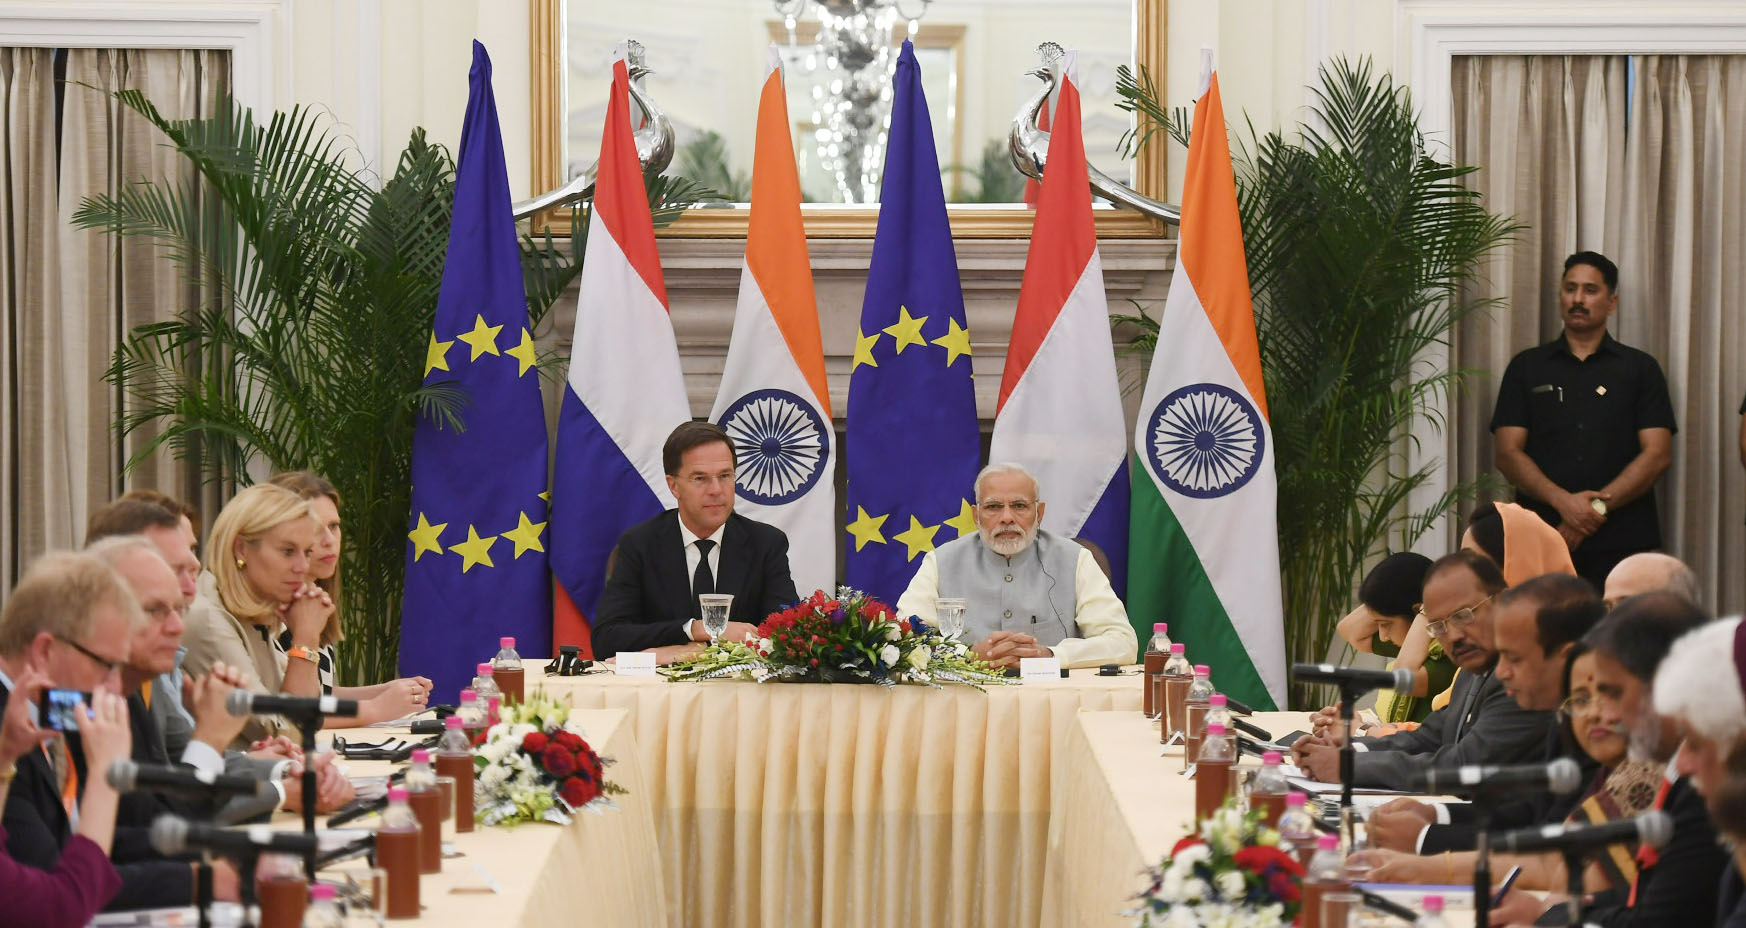 The Prime Minister, Shri Narendra Modi with the Prime Minister of the Kingdom of Netherlands, Mr. Mark Rutte at the India- Netherlands CEOs Roundtable meeting, at Hyderabad House, in New Delhi on May 24, 2018.